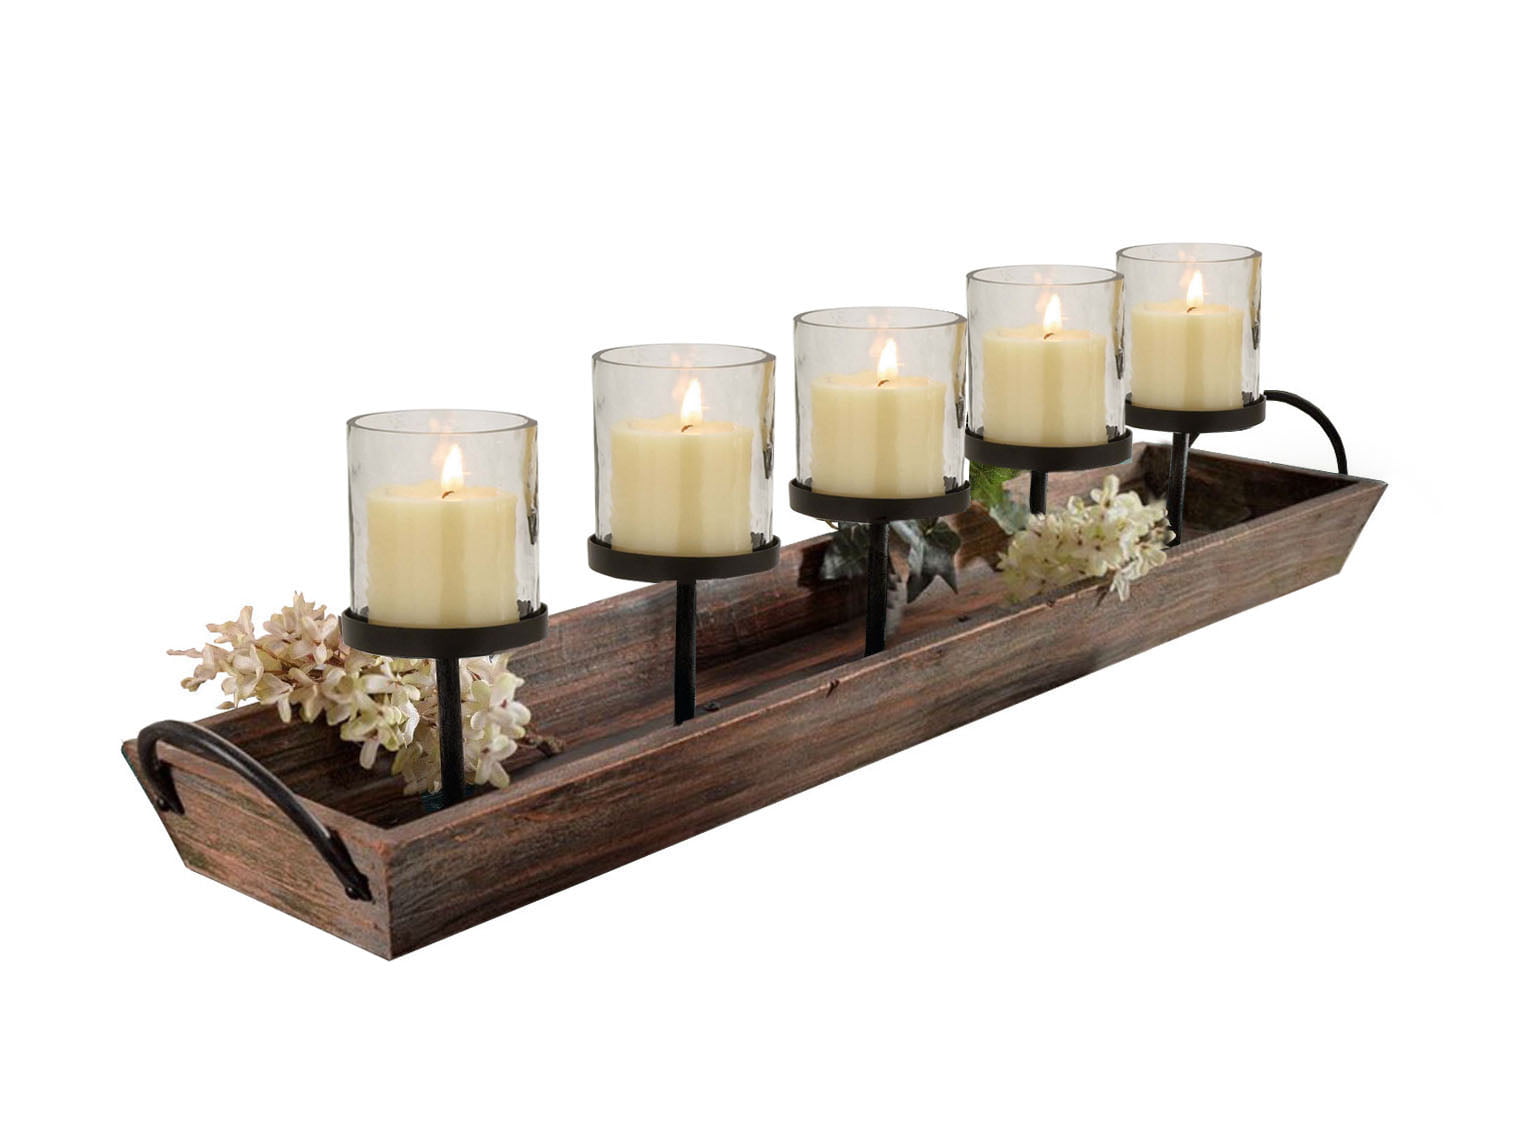 Iron and wood Chime candle holder